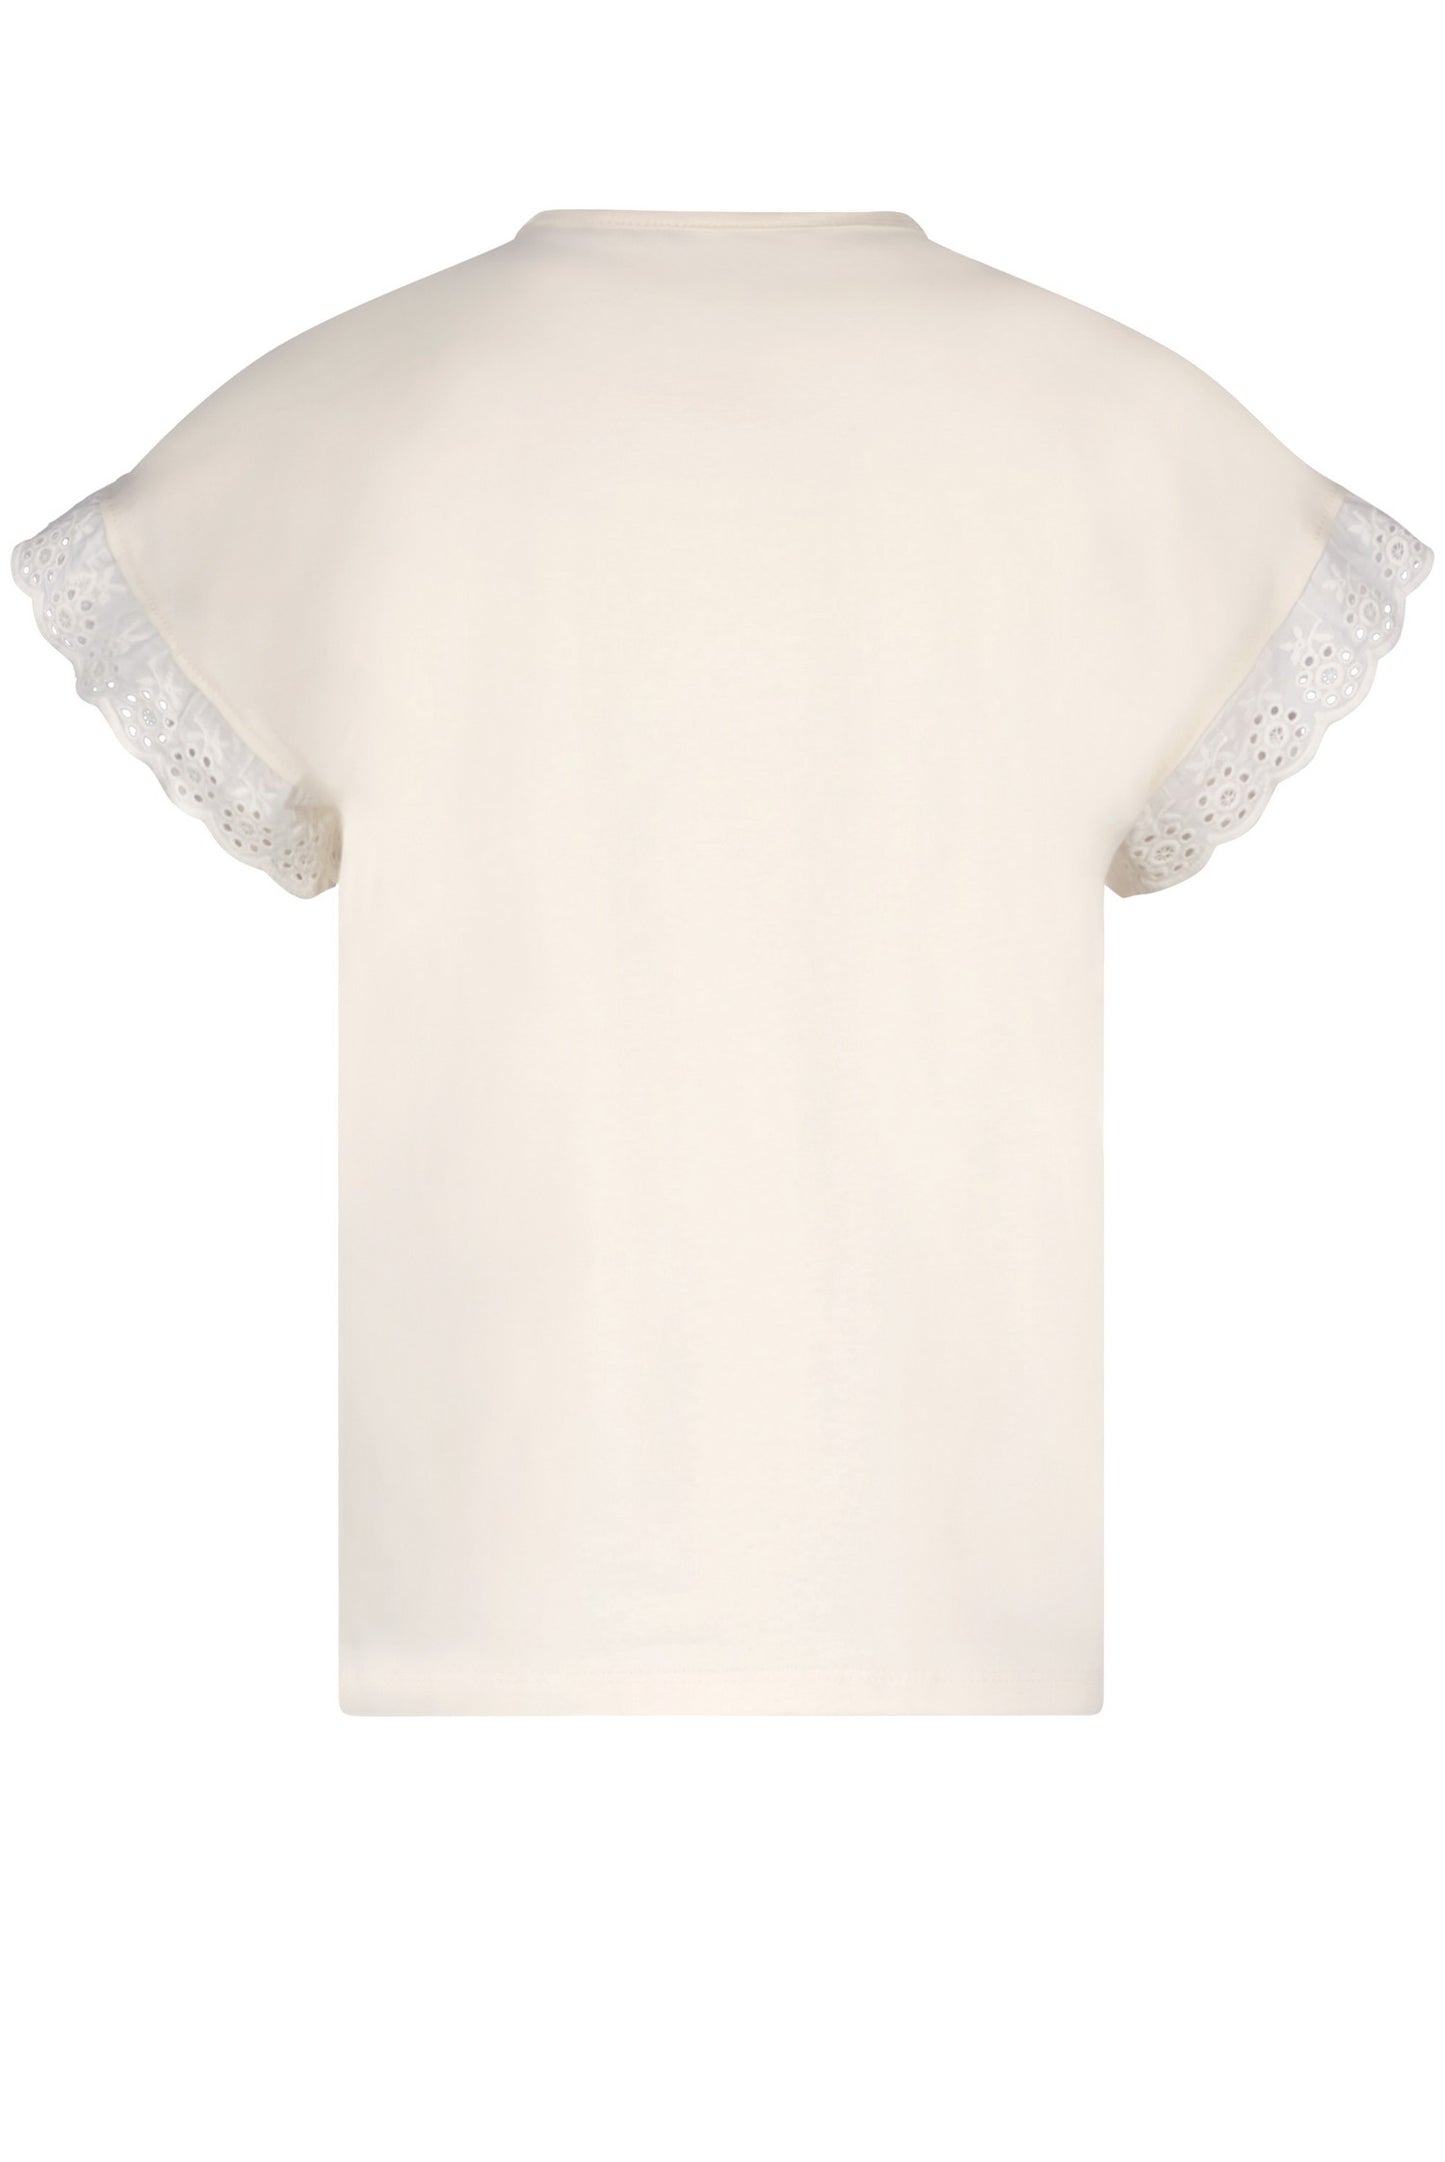 || Nono || Broderie t-shirt ‘Nicely’